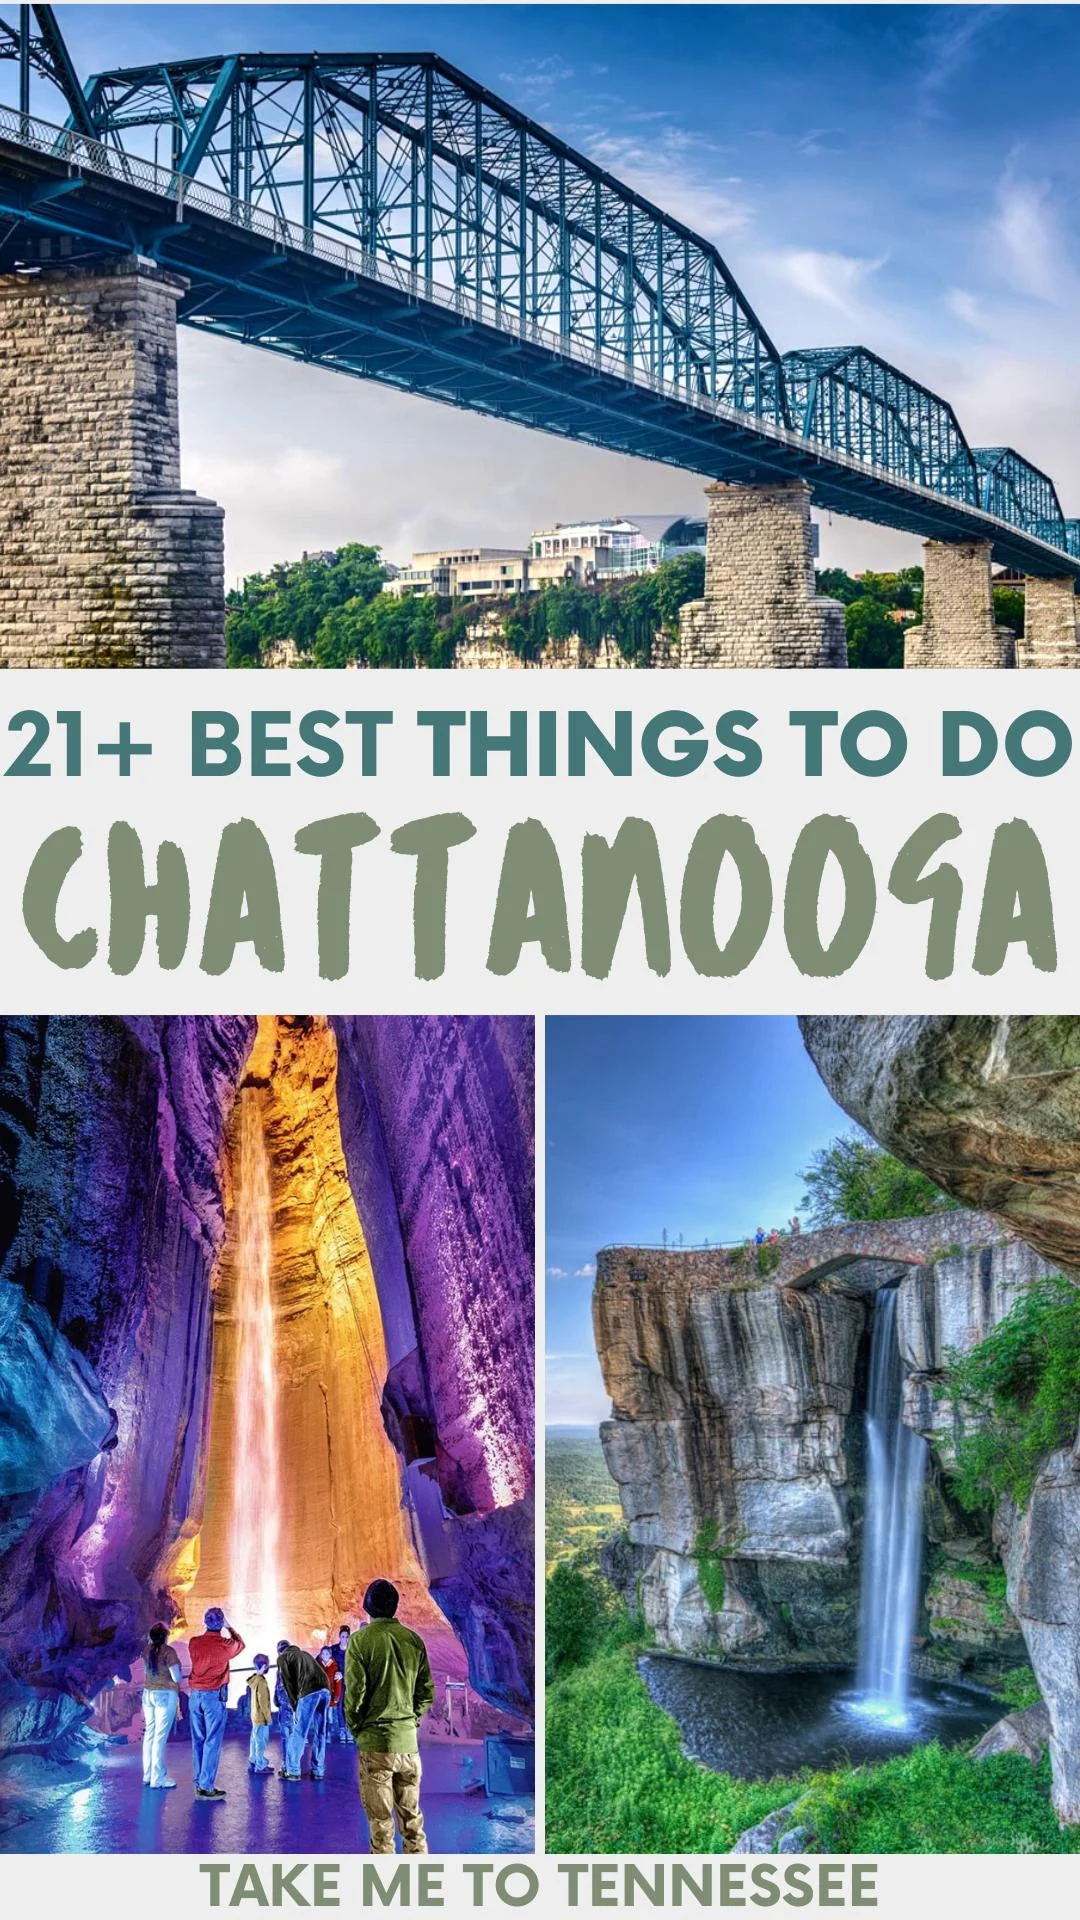 21+ best things to do in chattanooga pinterest pin 